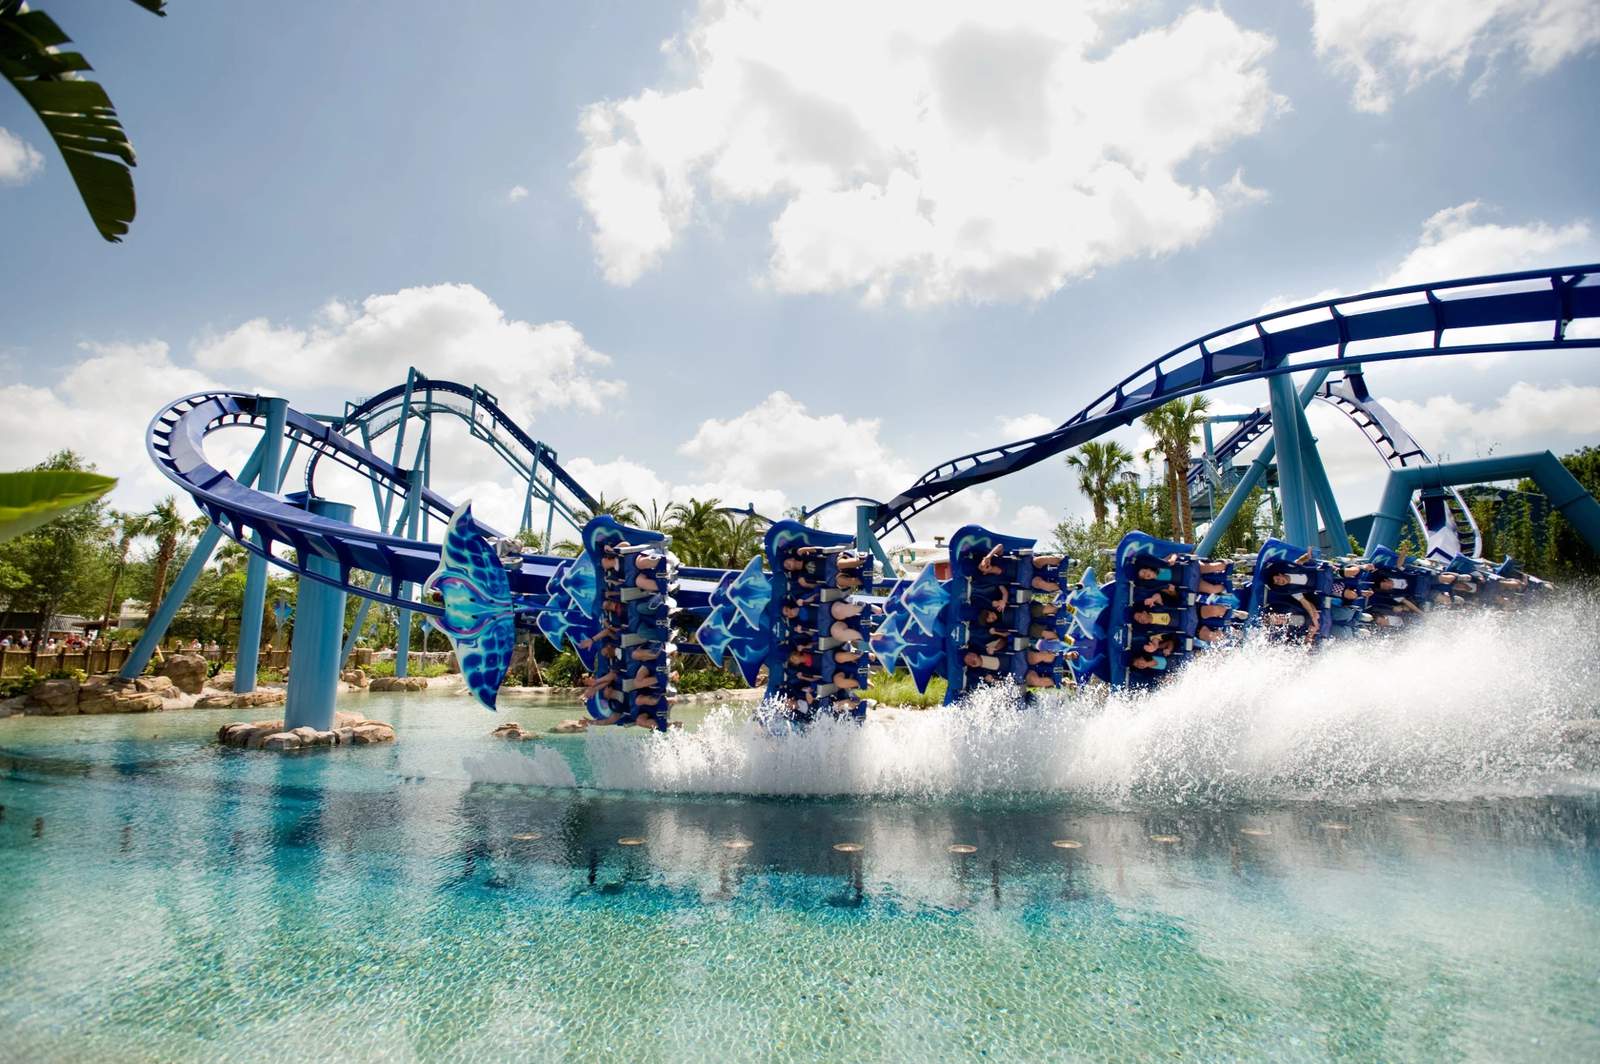 Visit SeaWorld Orlando for rest of 2020, all of 2021 for $110